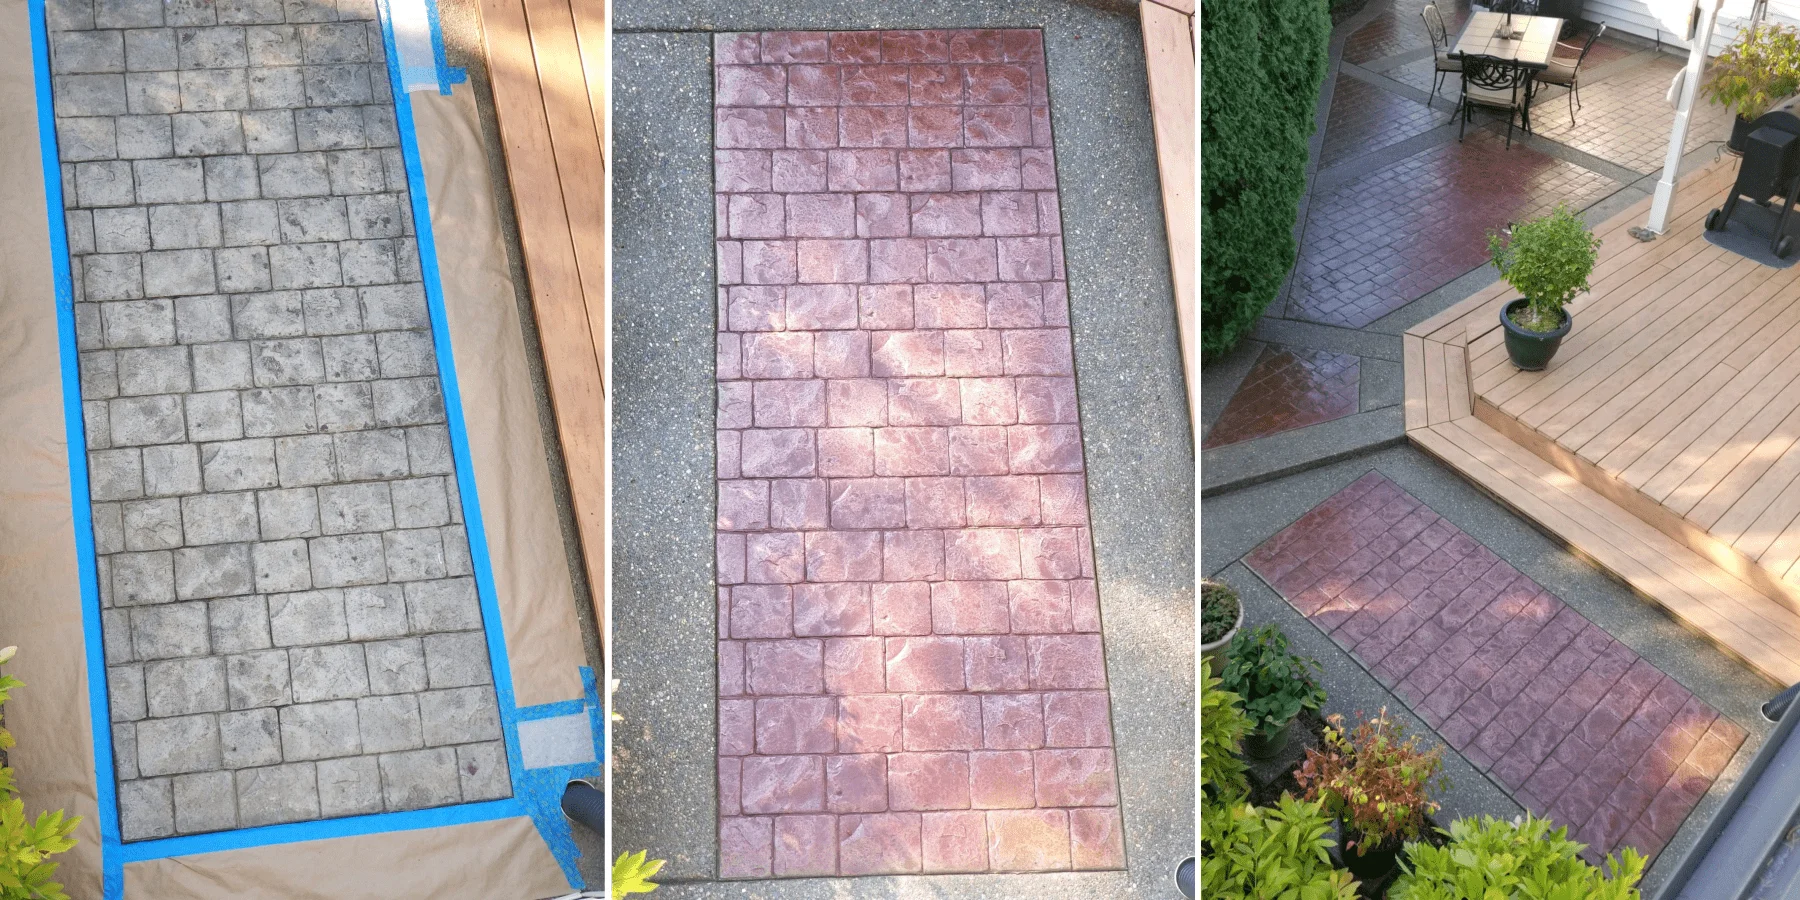 Three-phase transformation of a paver walkway: before staining, during the application of Cinnabar Antiquing Stain, and after sealing with Easy Seal Satin Sealer, showing a vivid enhancement from faded gray to rich cinnabar